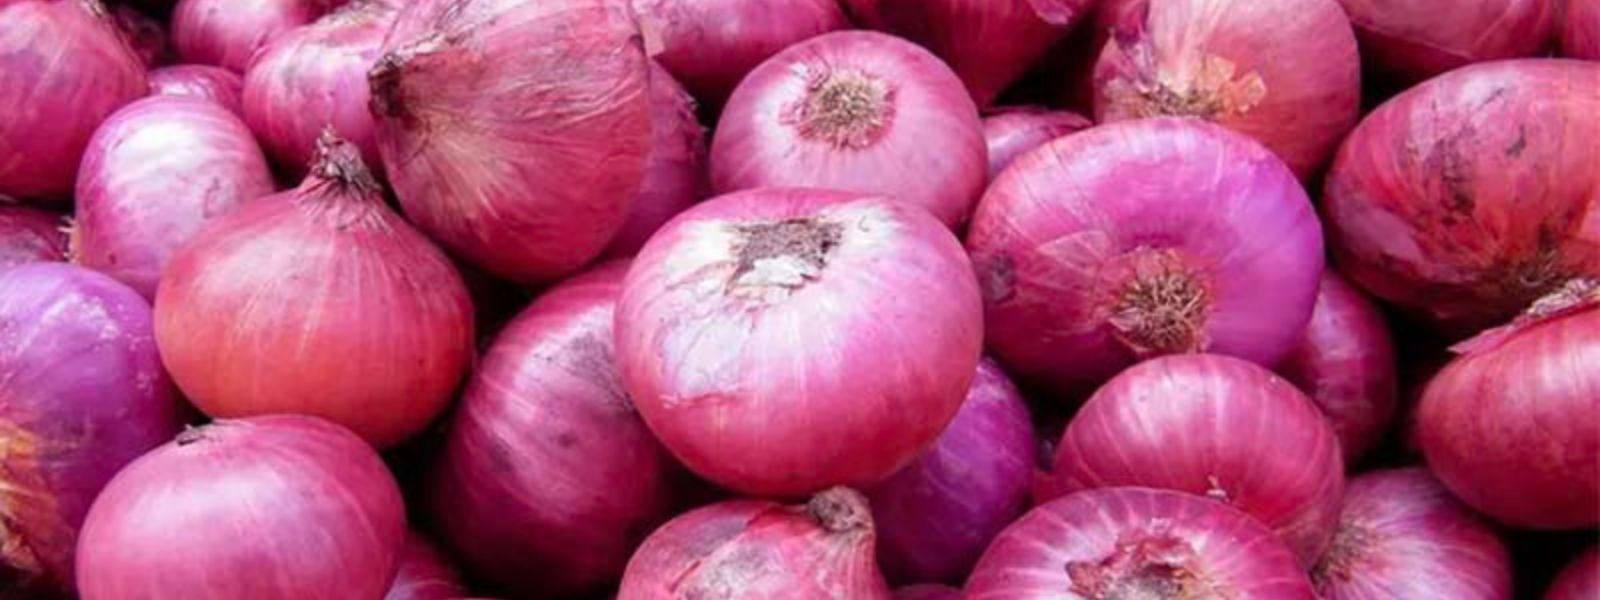 Export of onions permitted for Sri Lanka